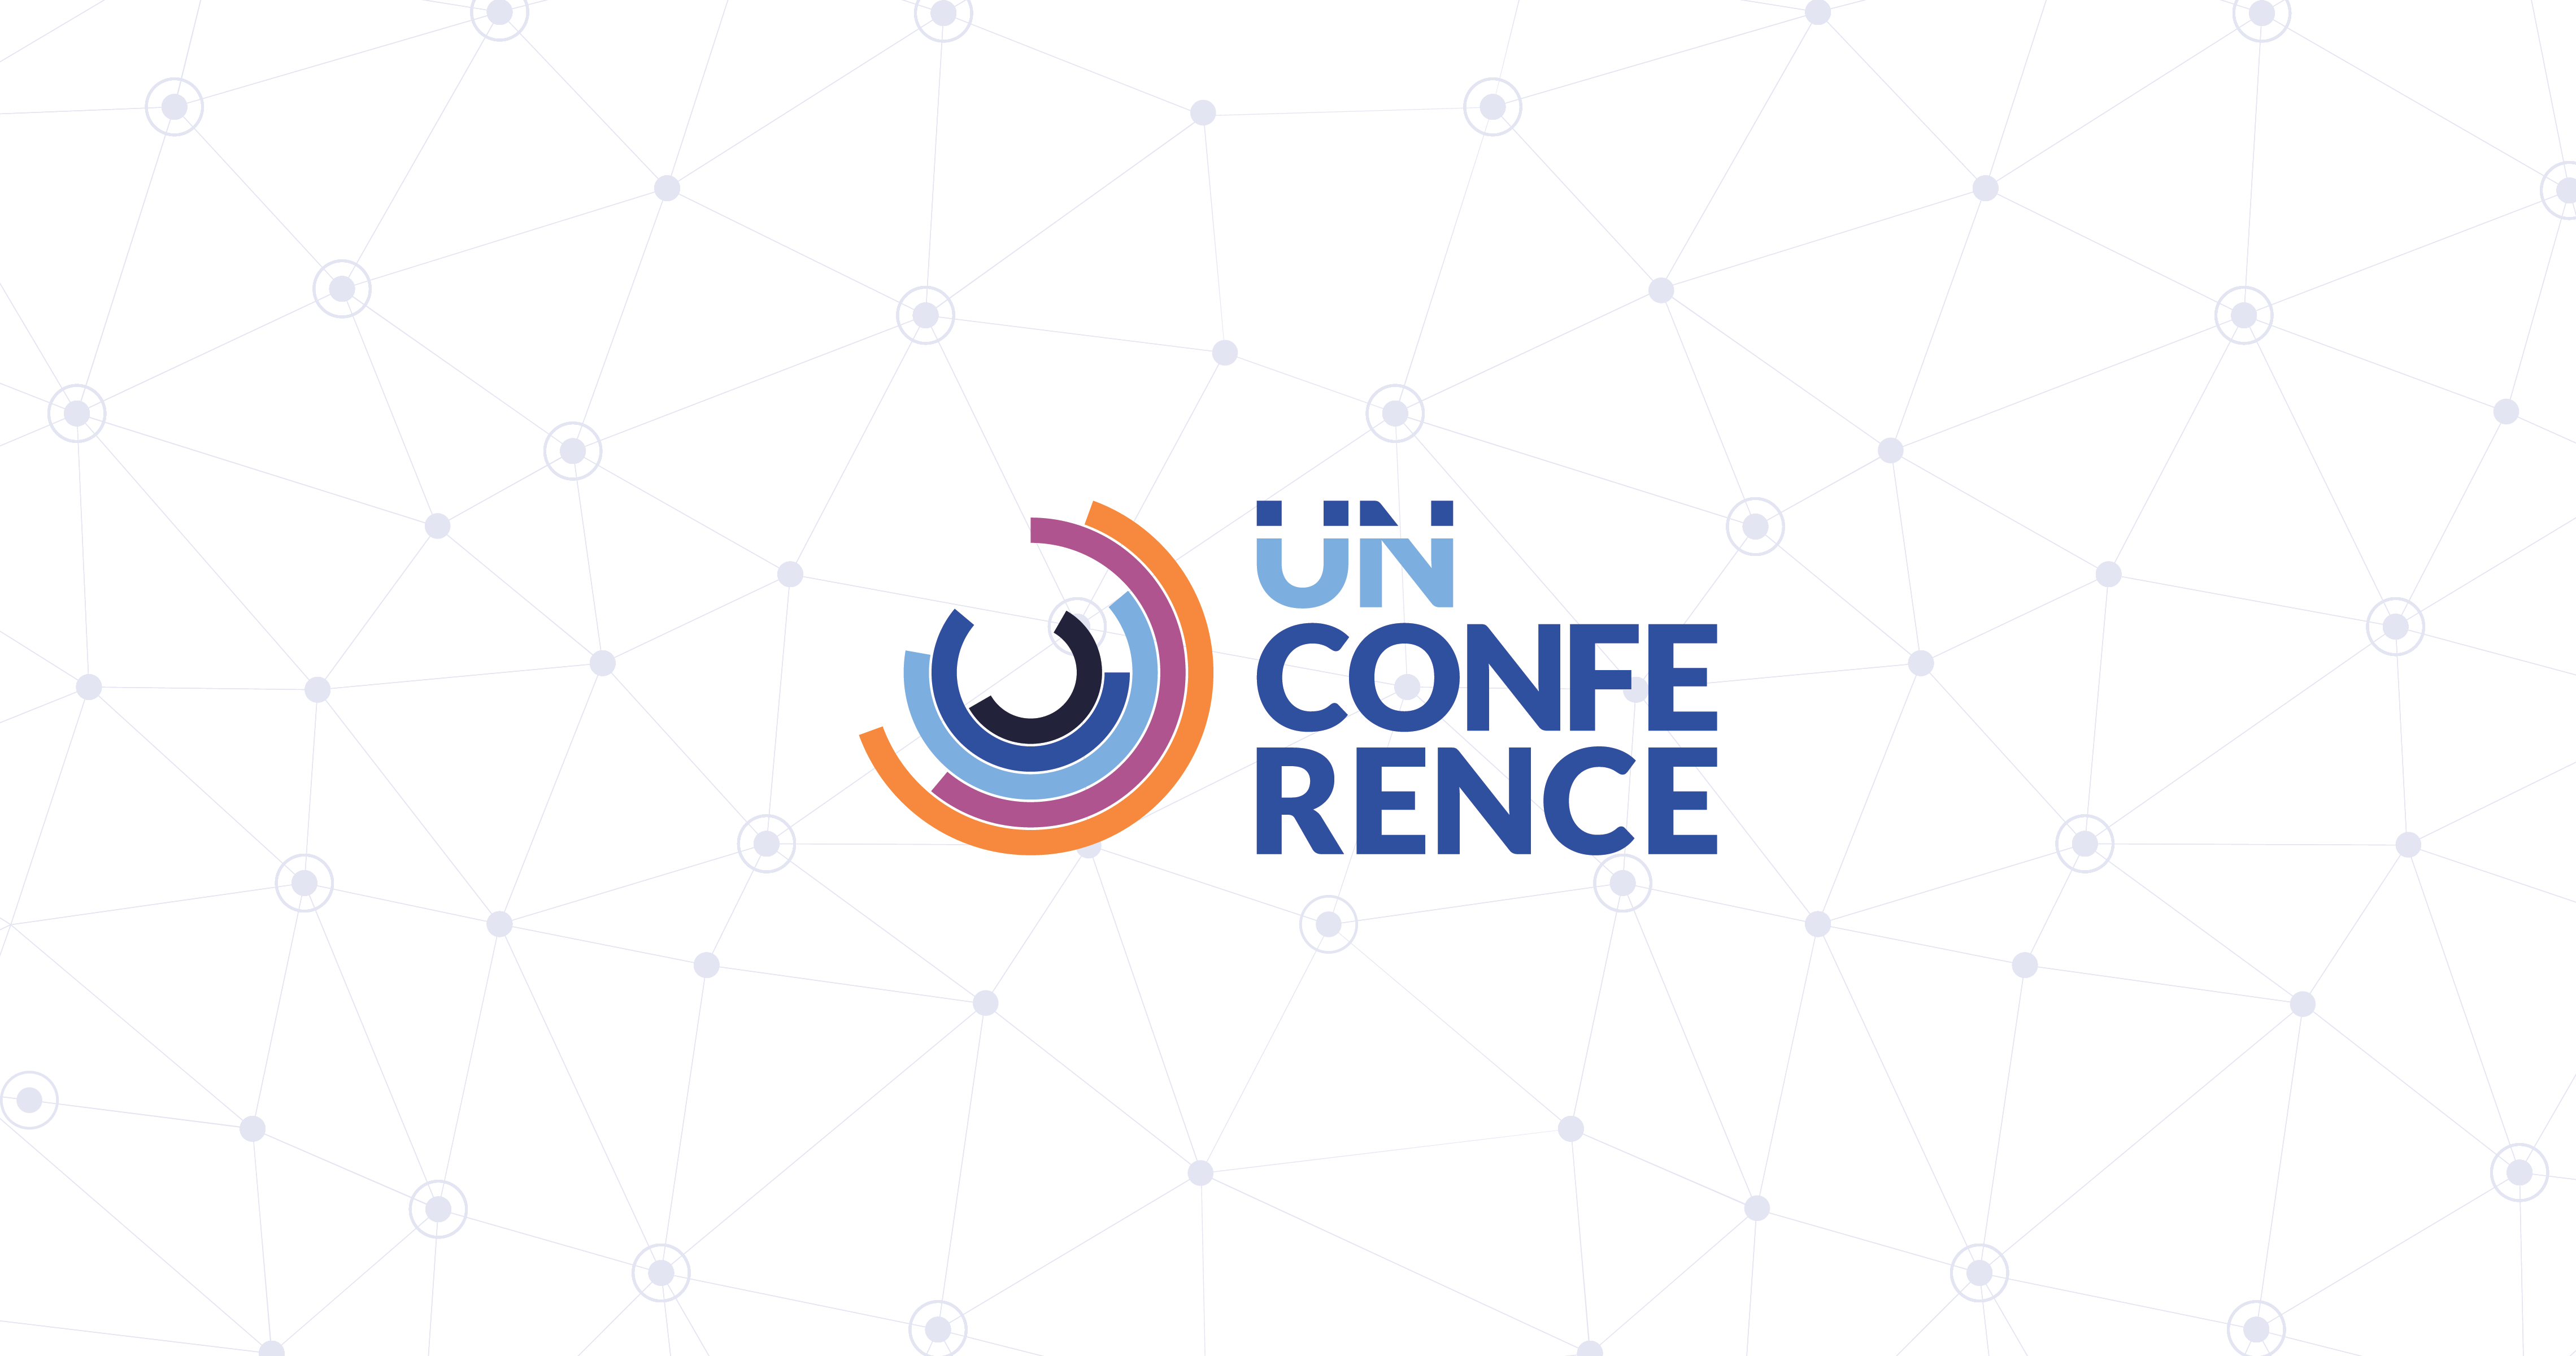 CCDI UnConference – FAQs